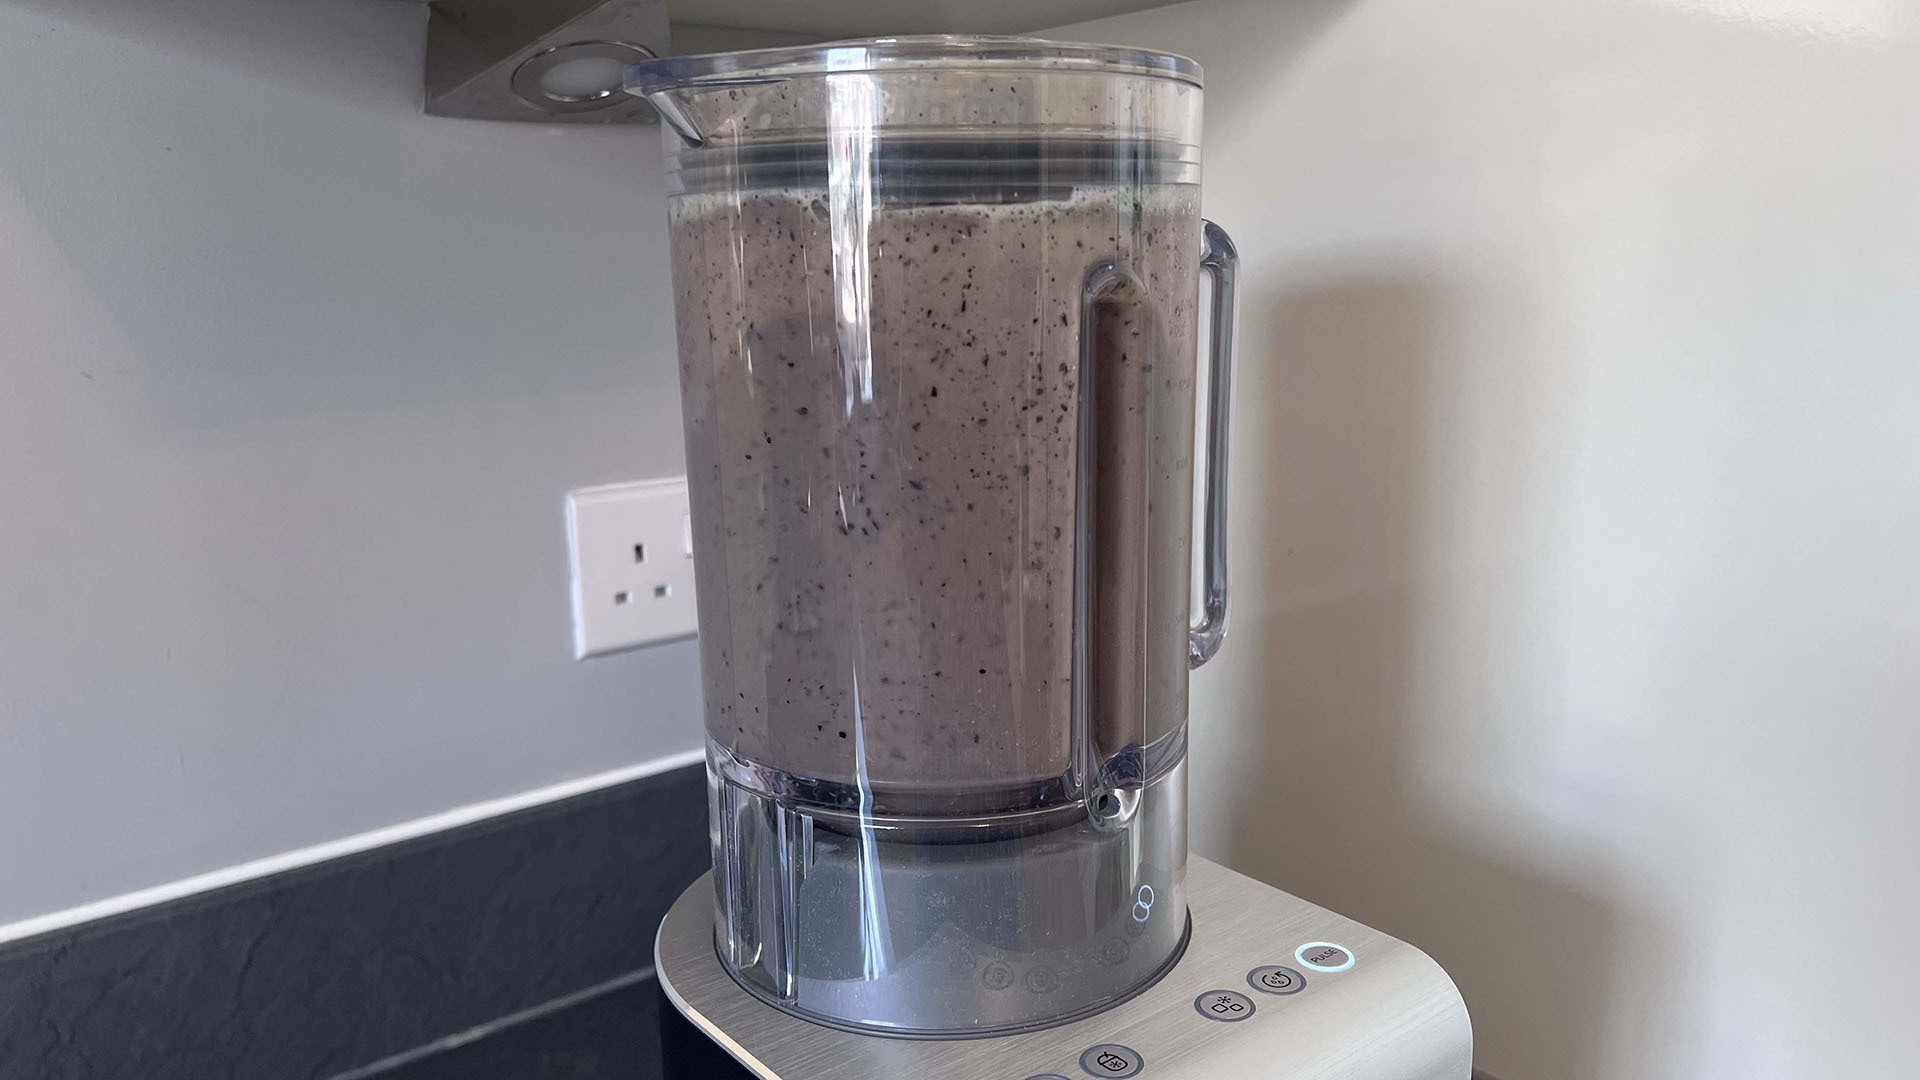 banana, kale and blueberry being blended